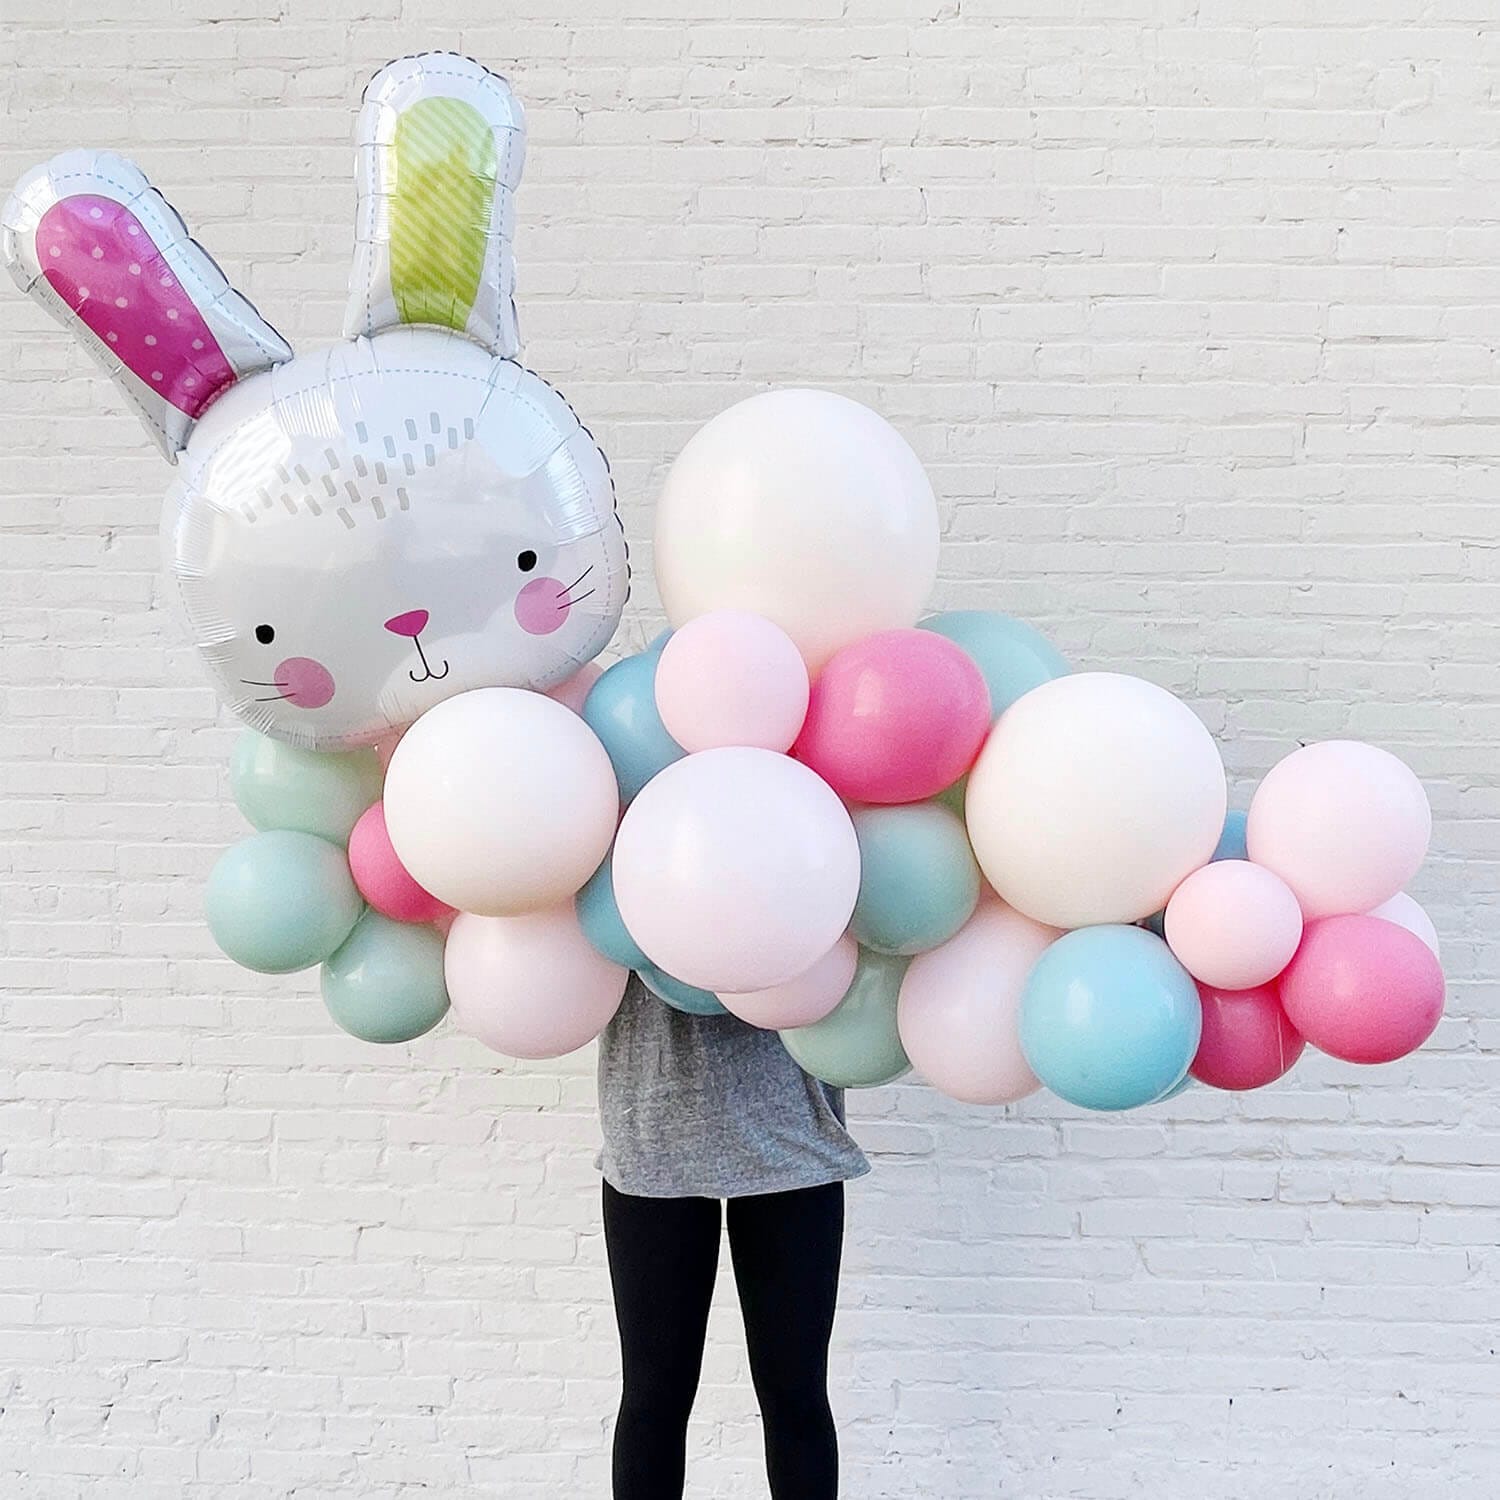 Pink, mint green, and blue pastel balloons in a Grab & Go Garland for Easter from Just Peachy.